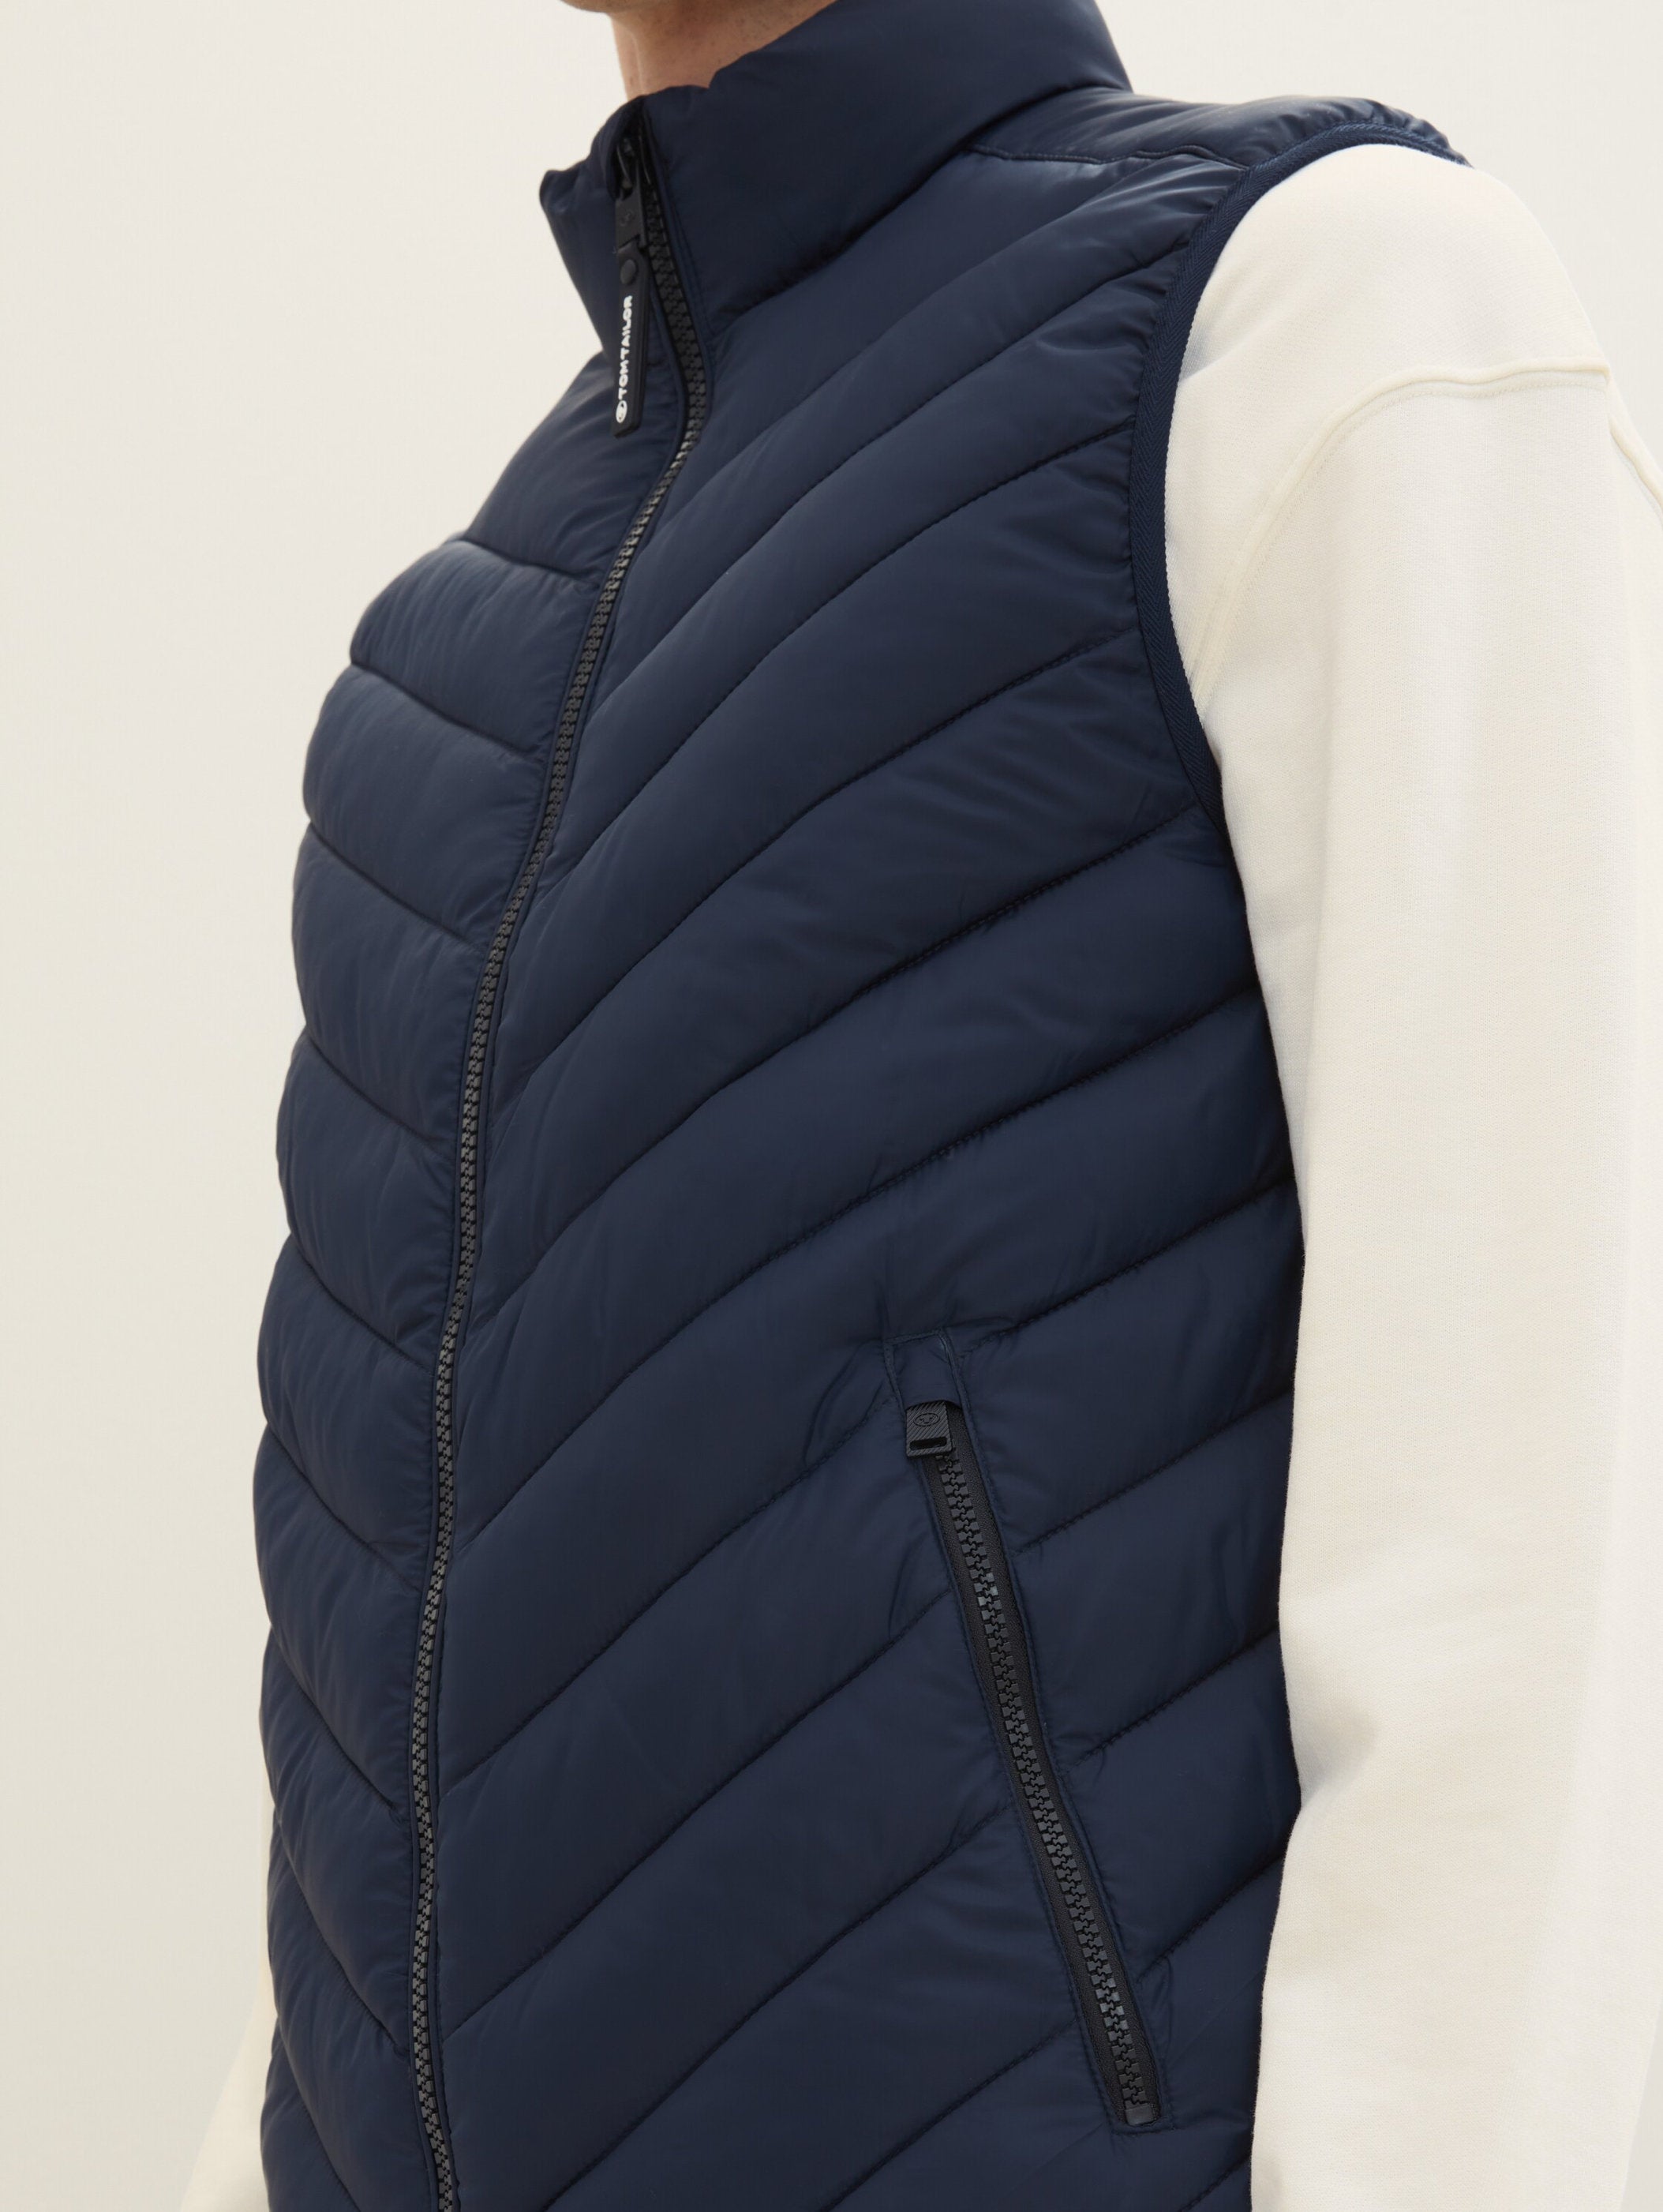 Quilted Puffer Light Weight Vest_1036072_10668_06